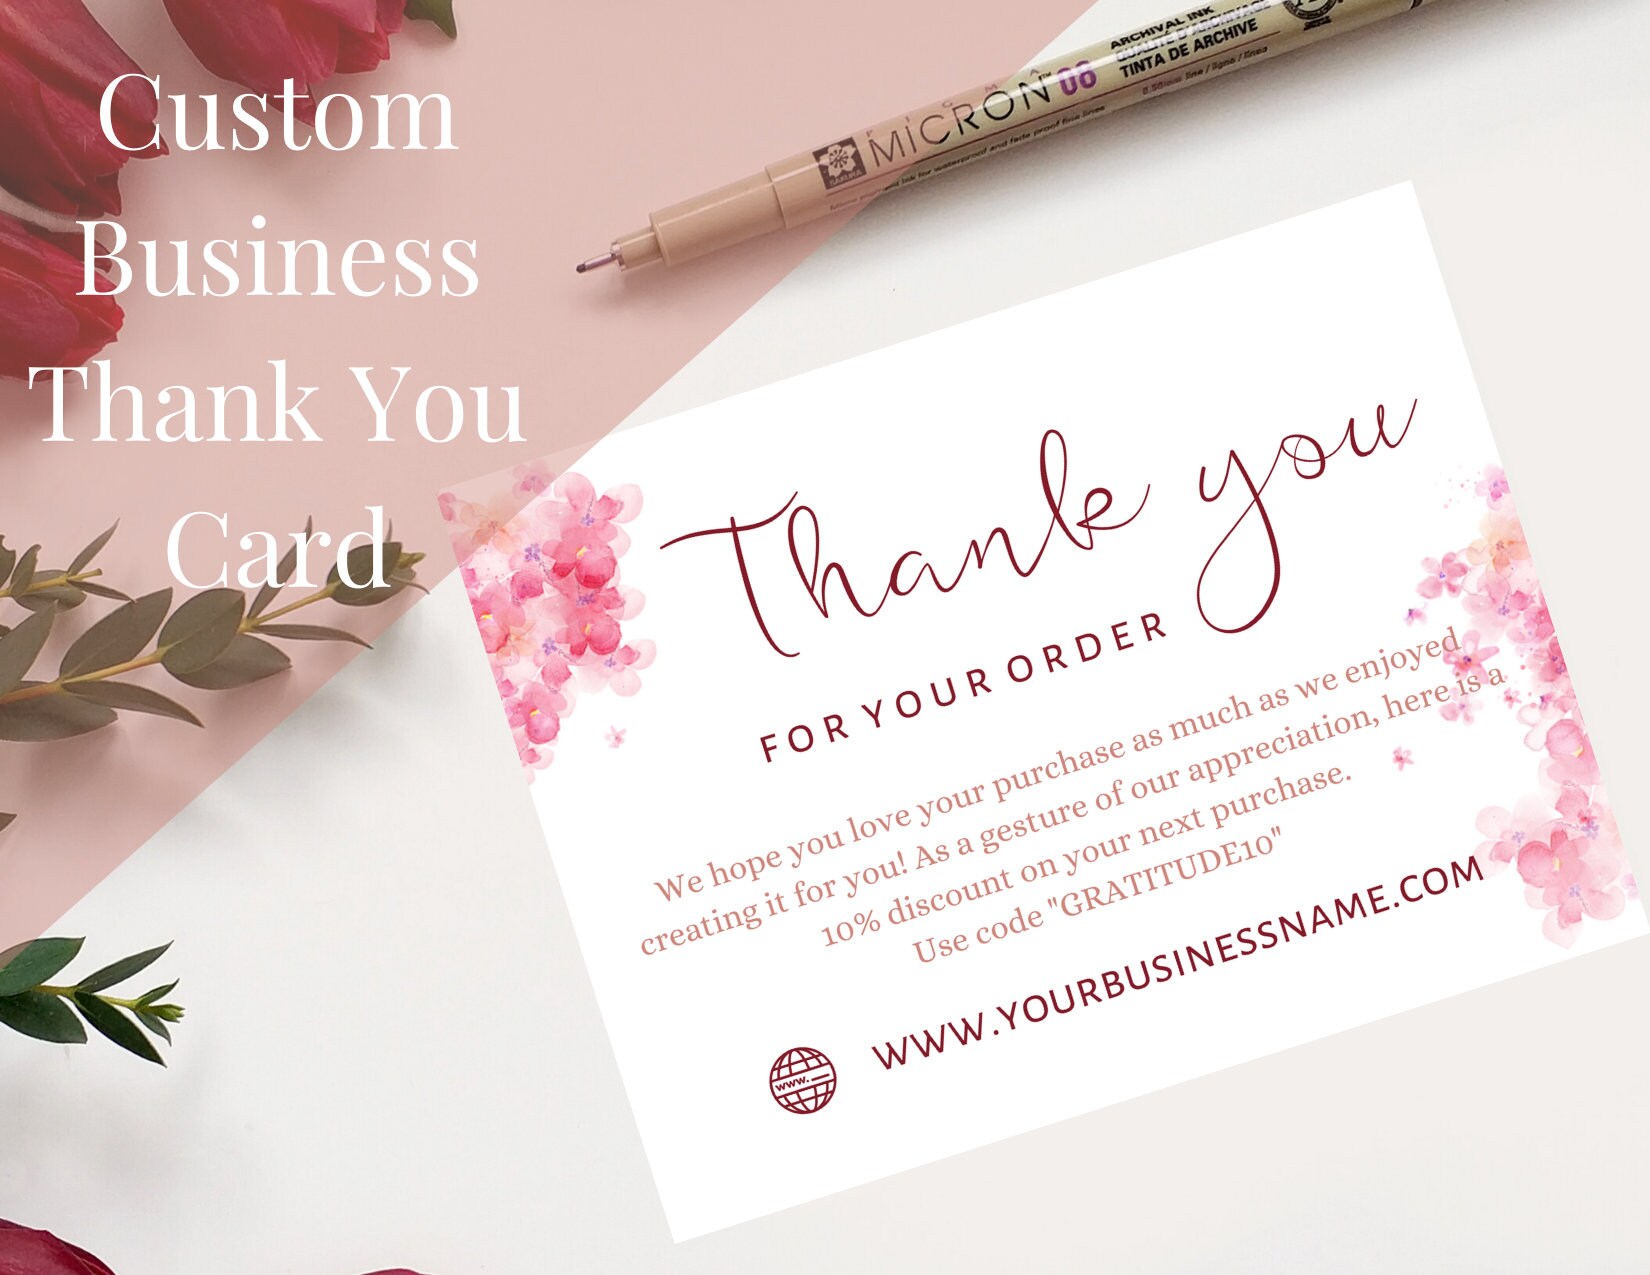 custom-thank-you-card-for-business-business-package-insert-etsy